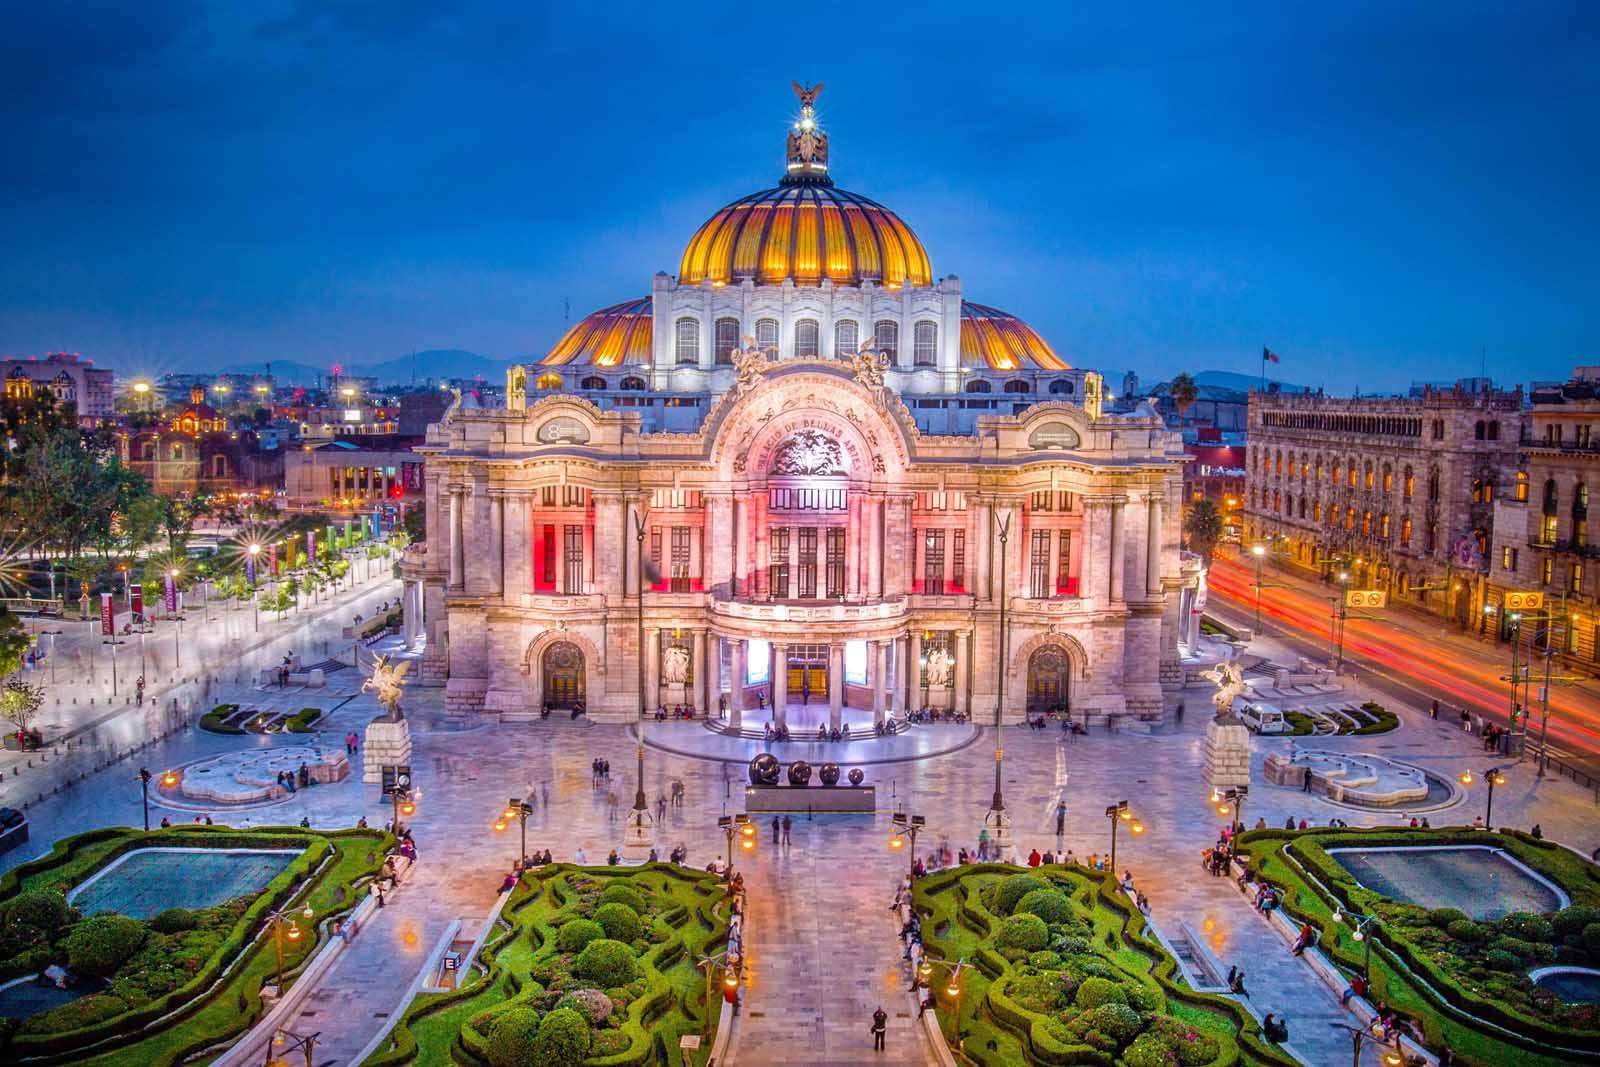 Mexico City Is a cool place to visit in Mexico